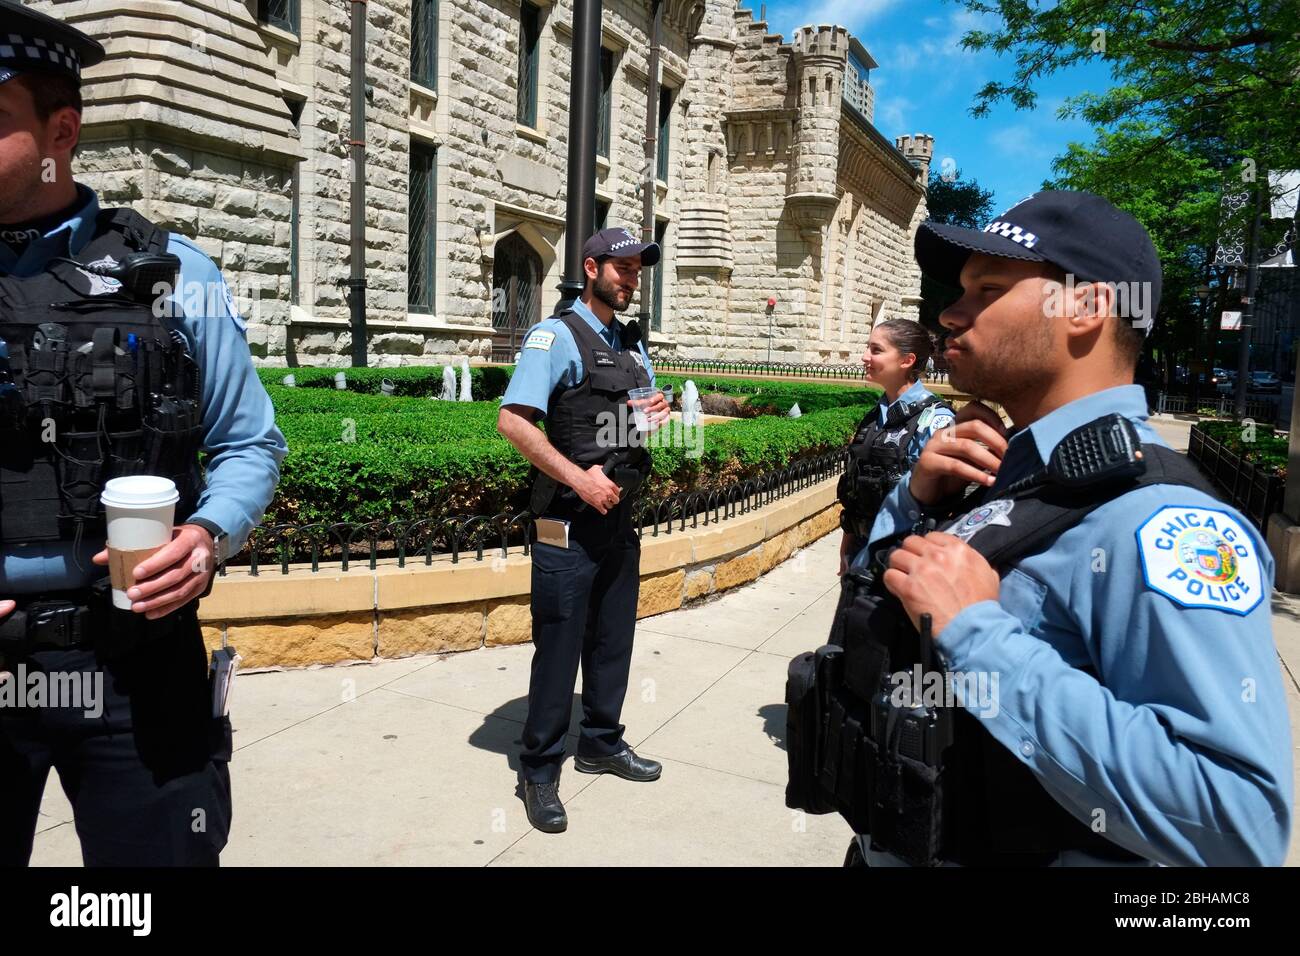 Chicago police officers, wearing bullet proof vest, on patrol in Downtown Chicago Stock Photo